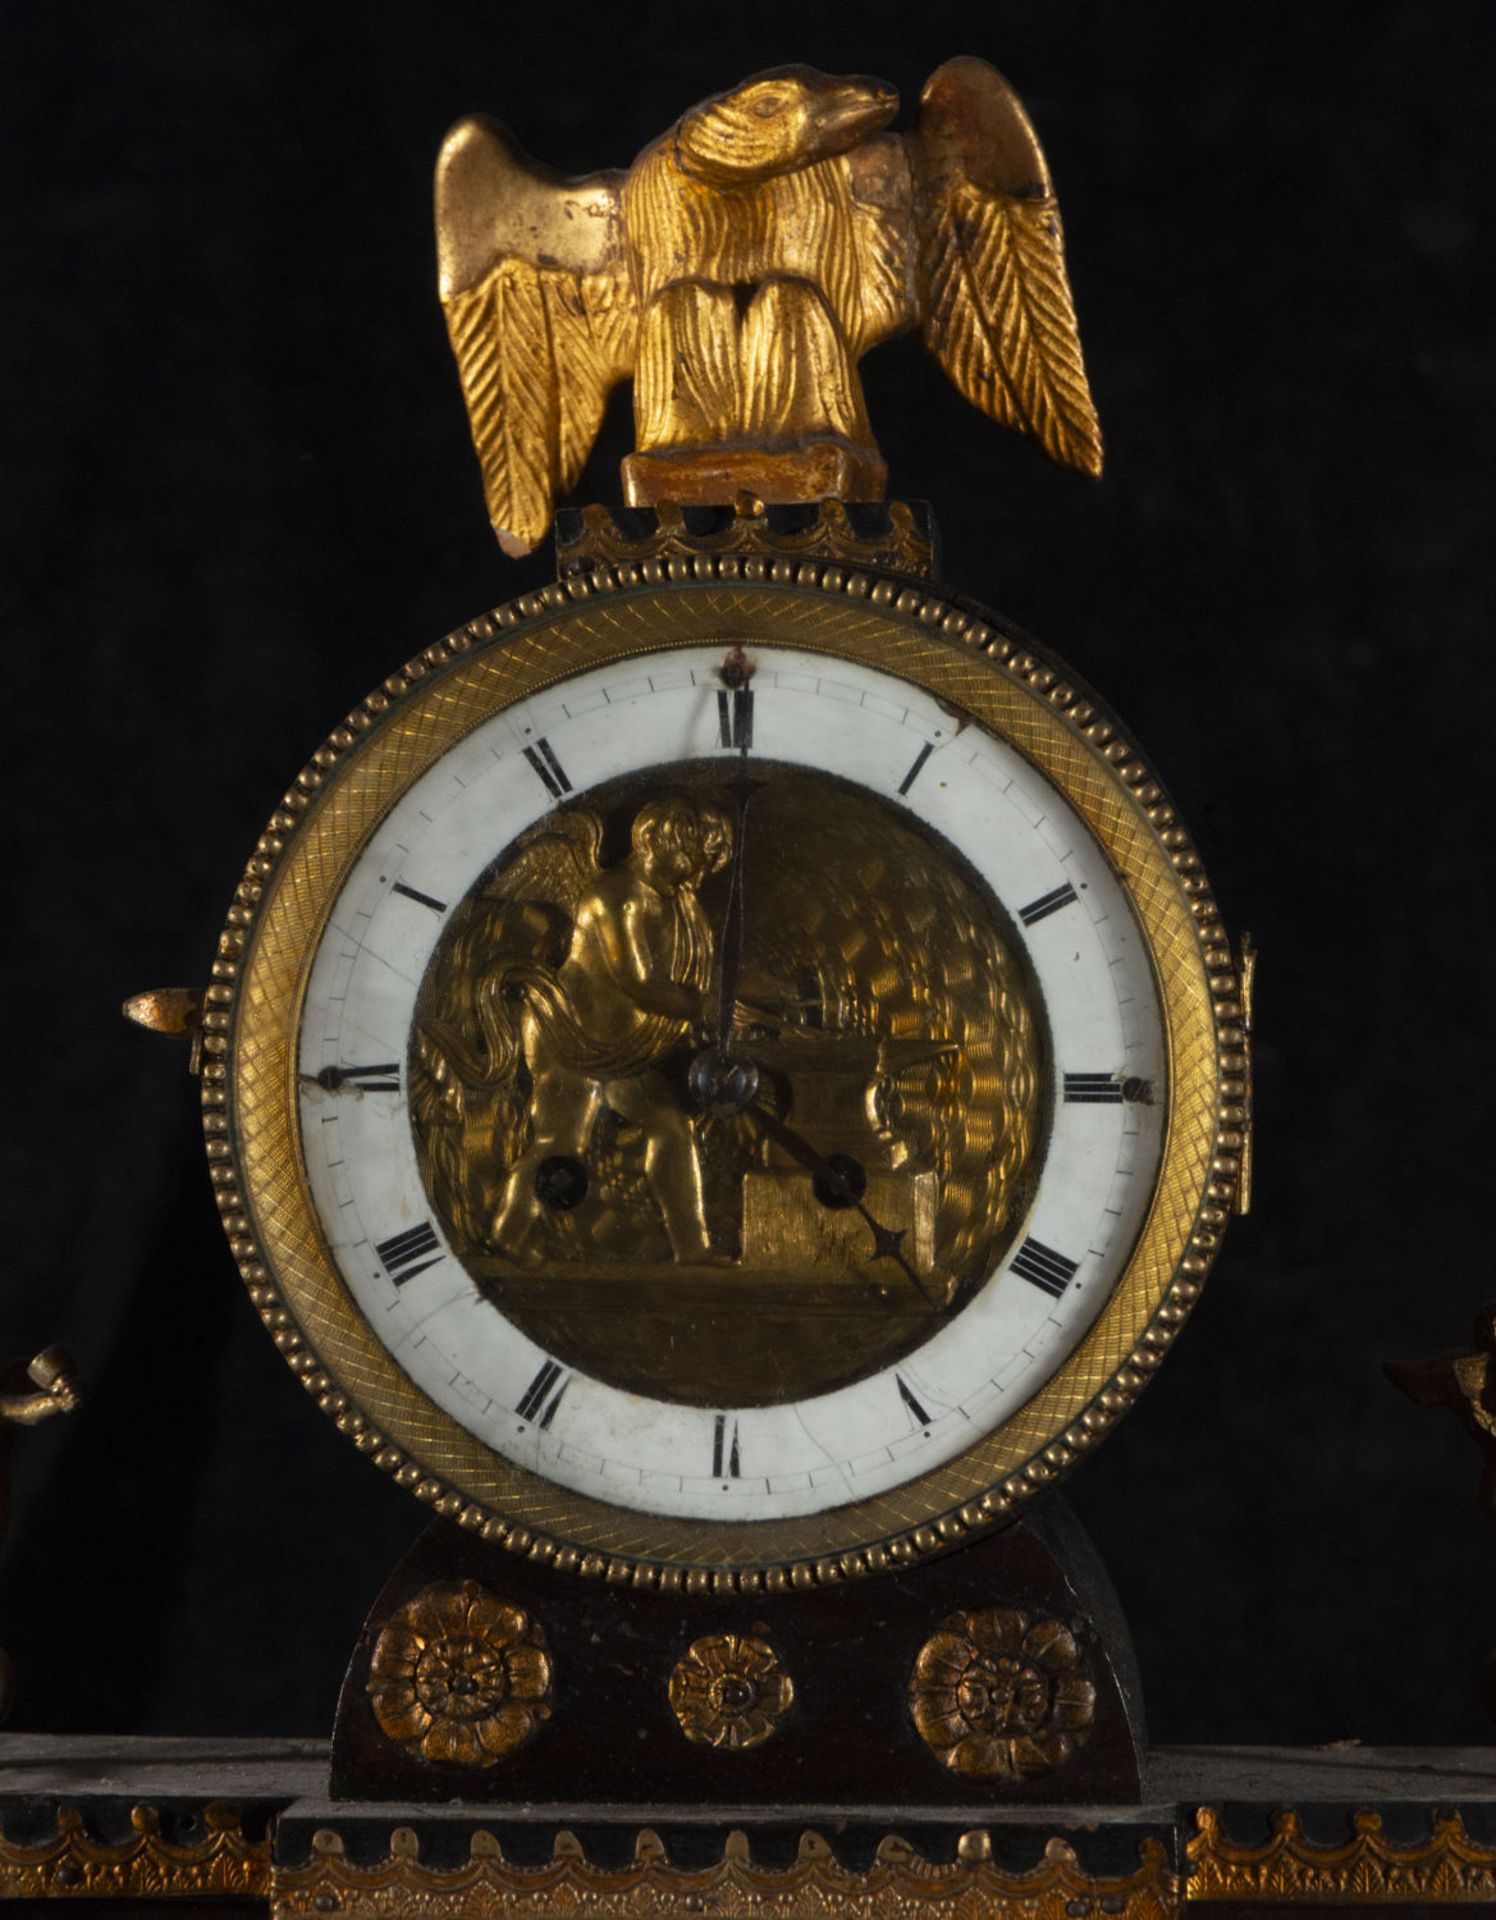 Large and Exquisite Bilderrahmen Table Clock with Automata from the late 19th century, Austria - Image 13 of 15